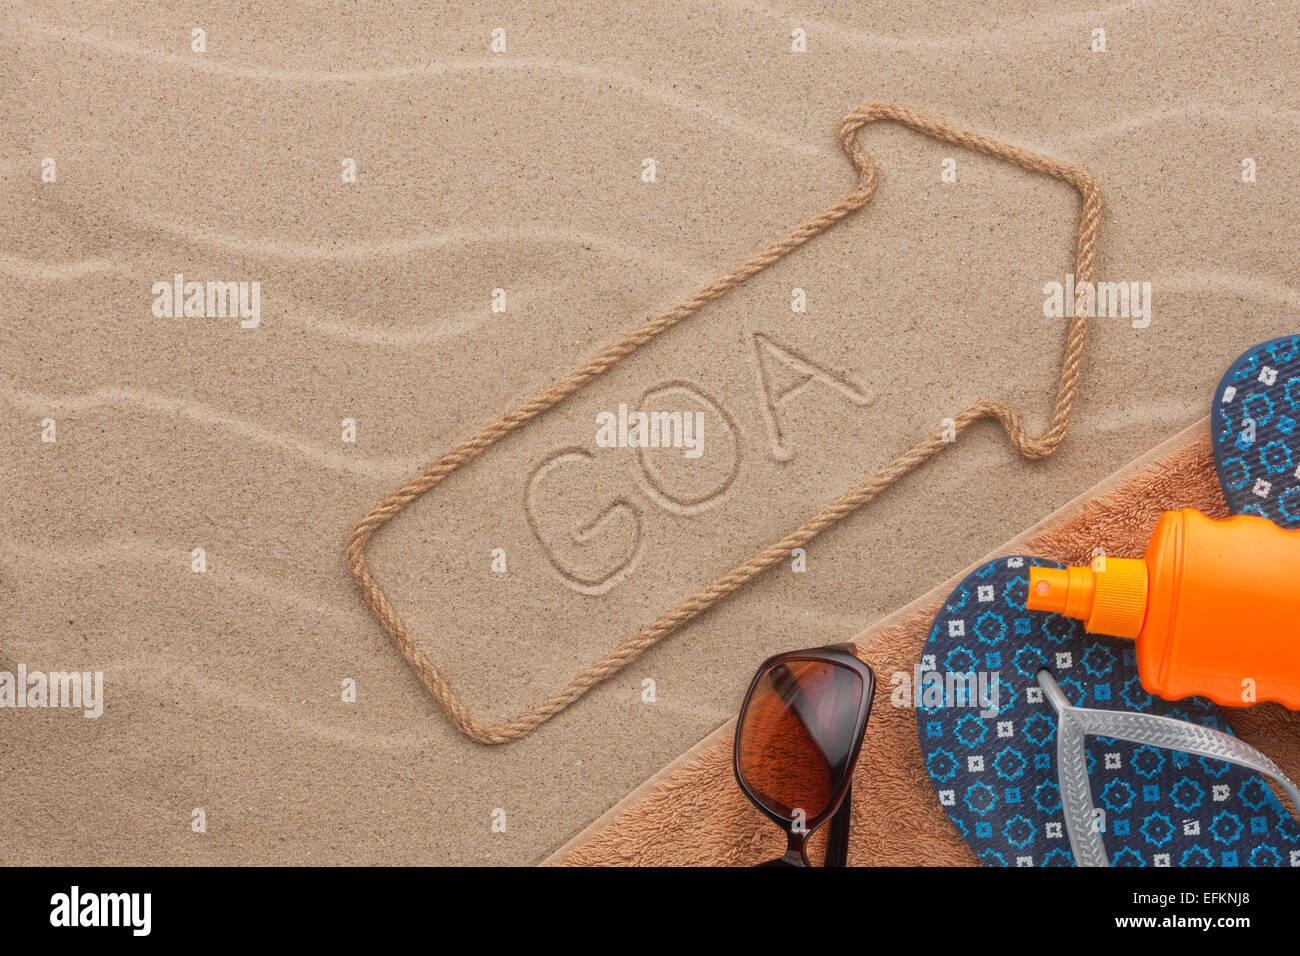 Goa pointer and beach accessories lying on the sand, as background Stock Photo